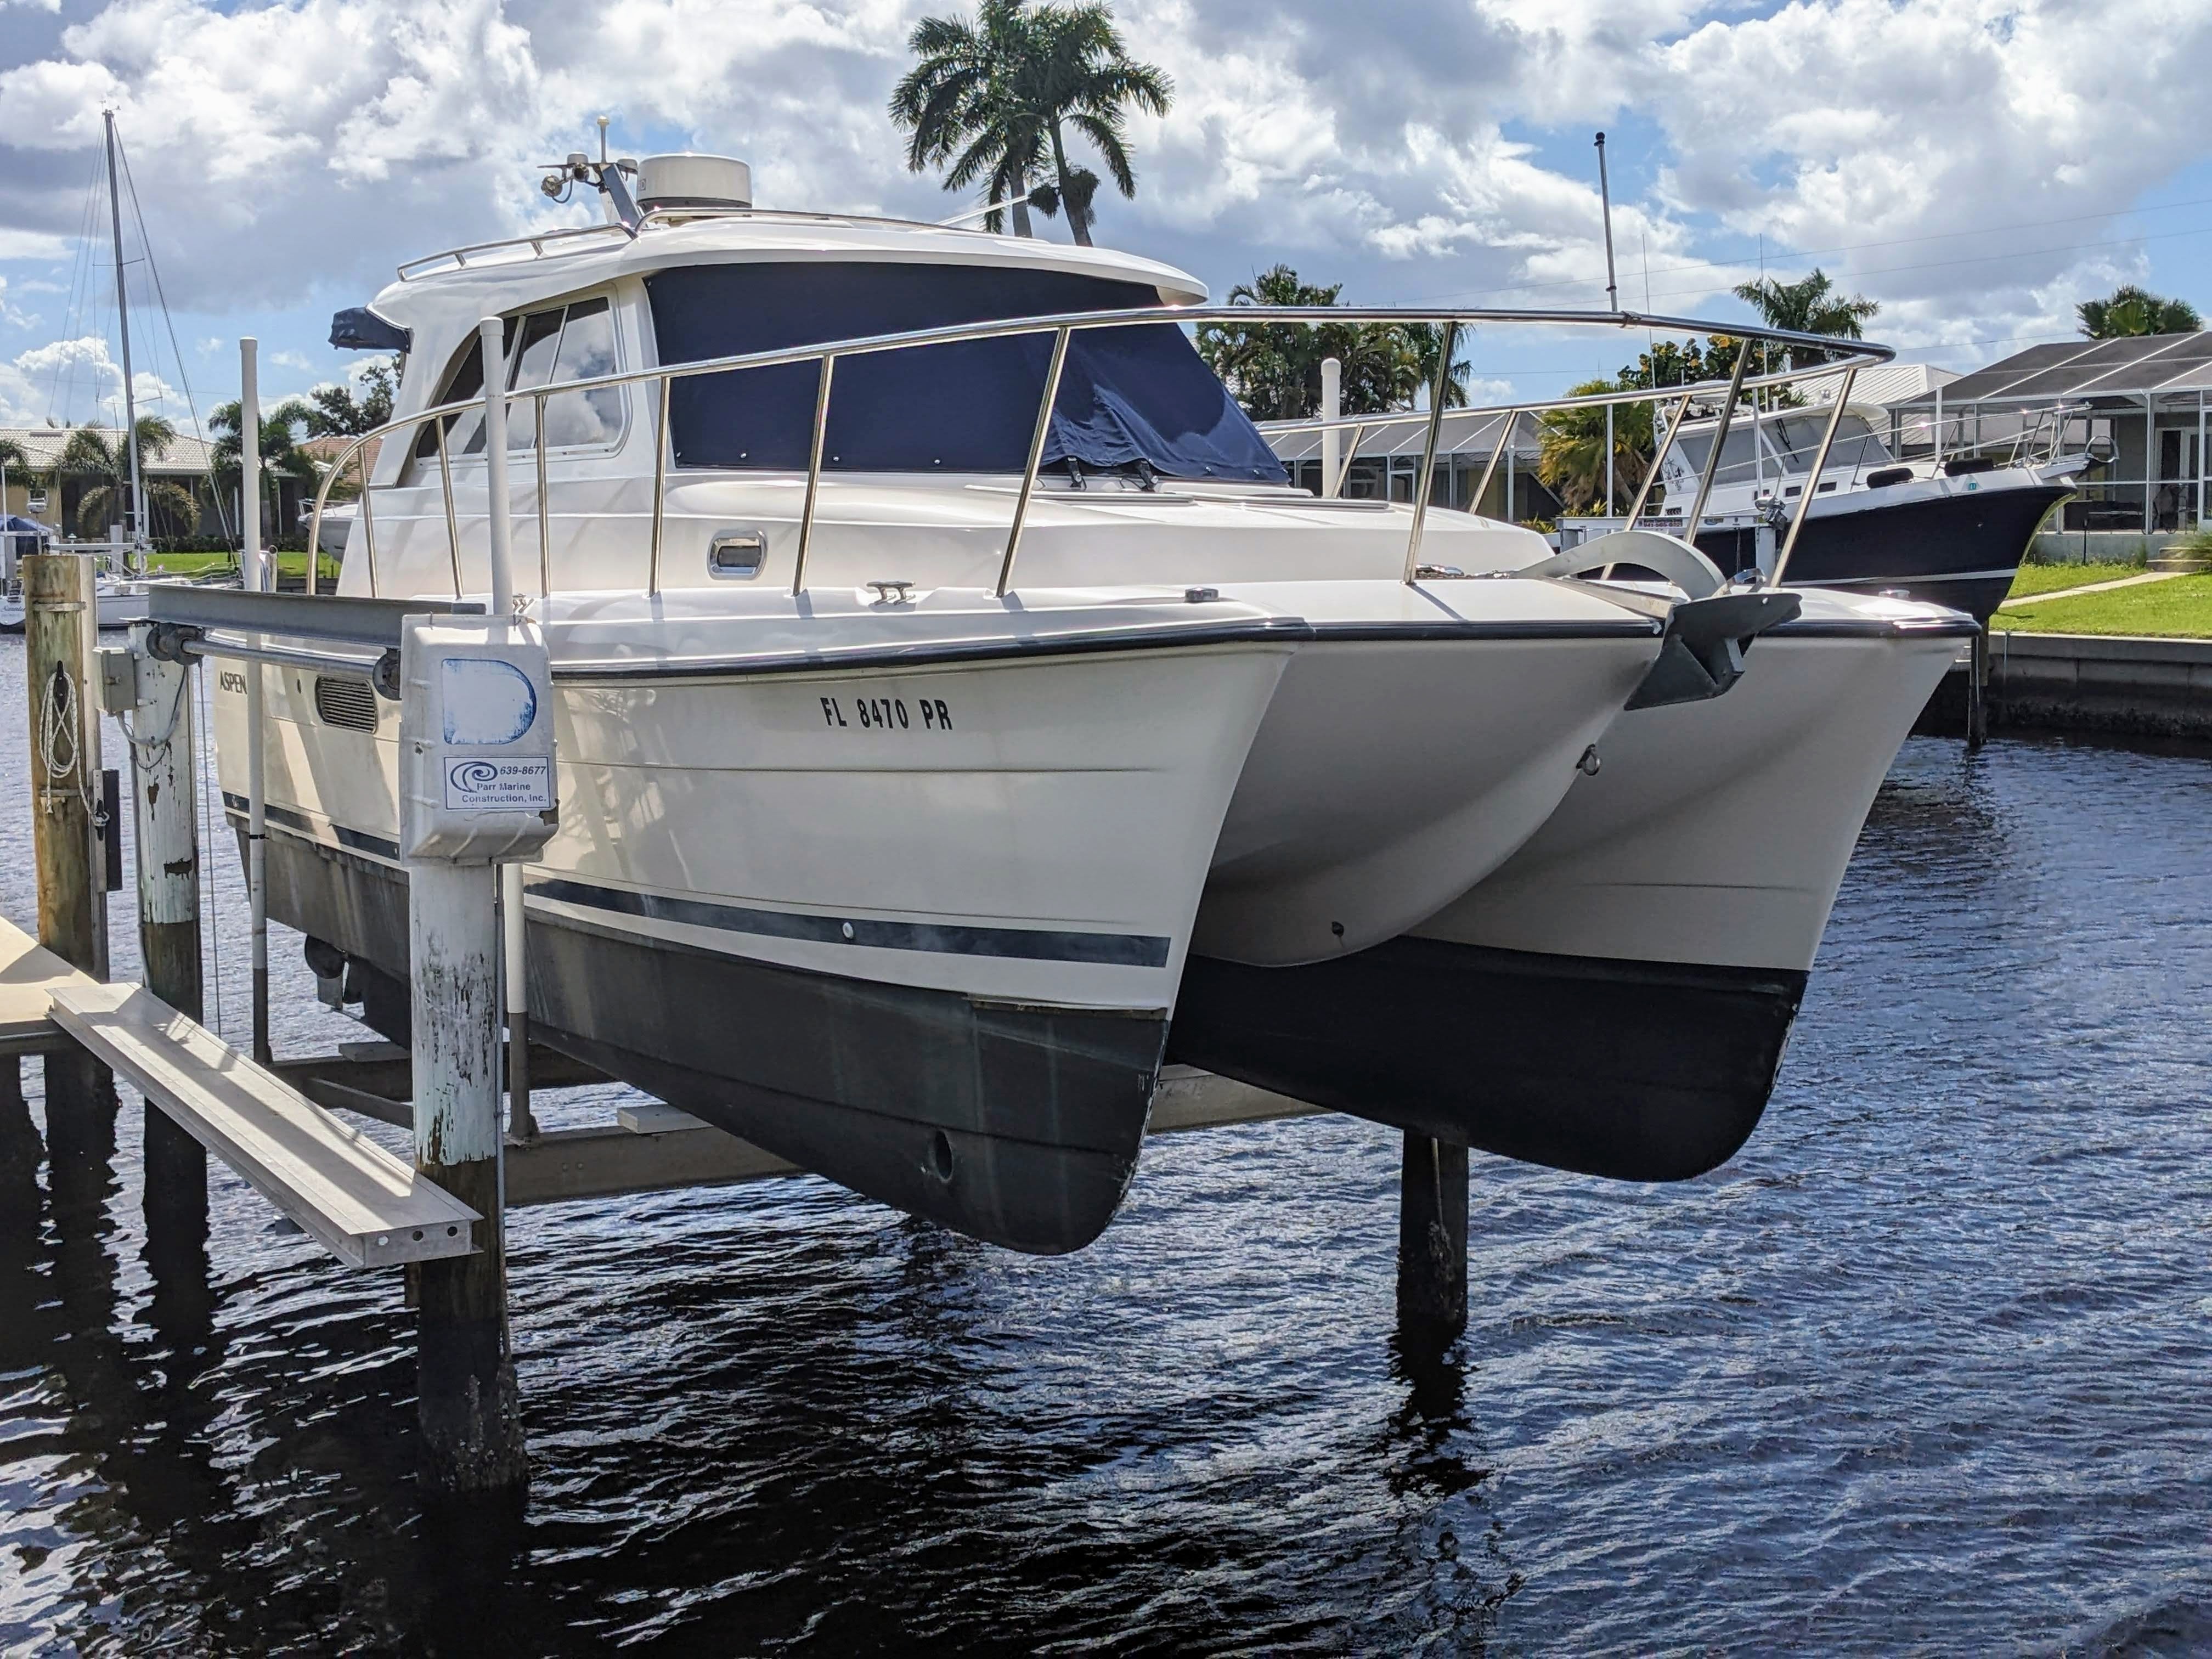 Used Power Catamaran for Sale 2014 C90 Additional Information